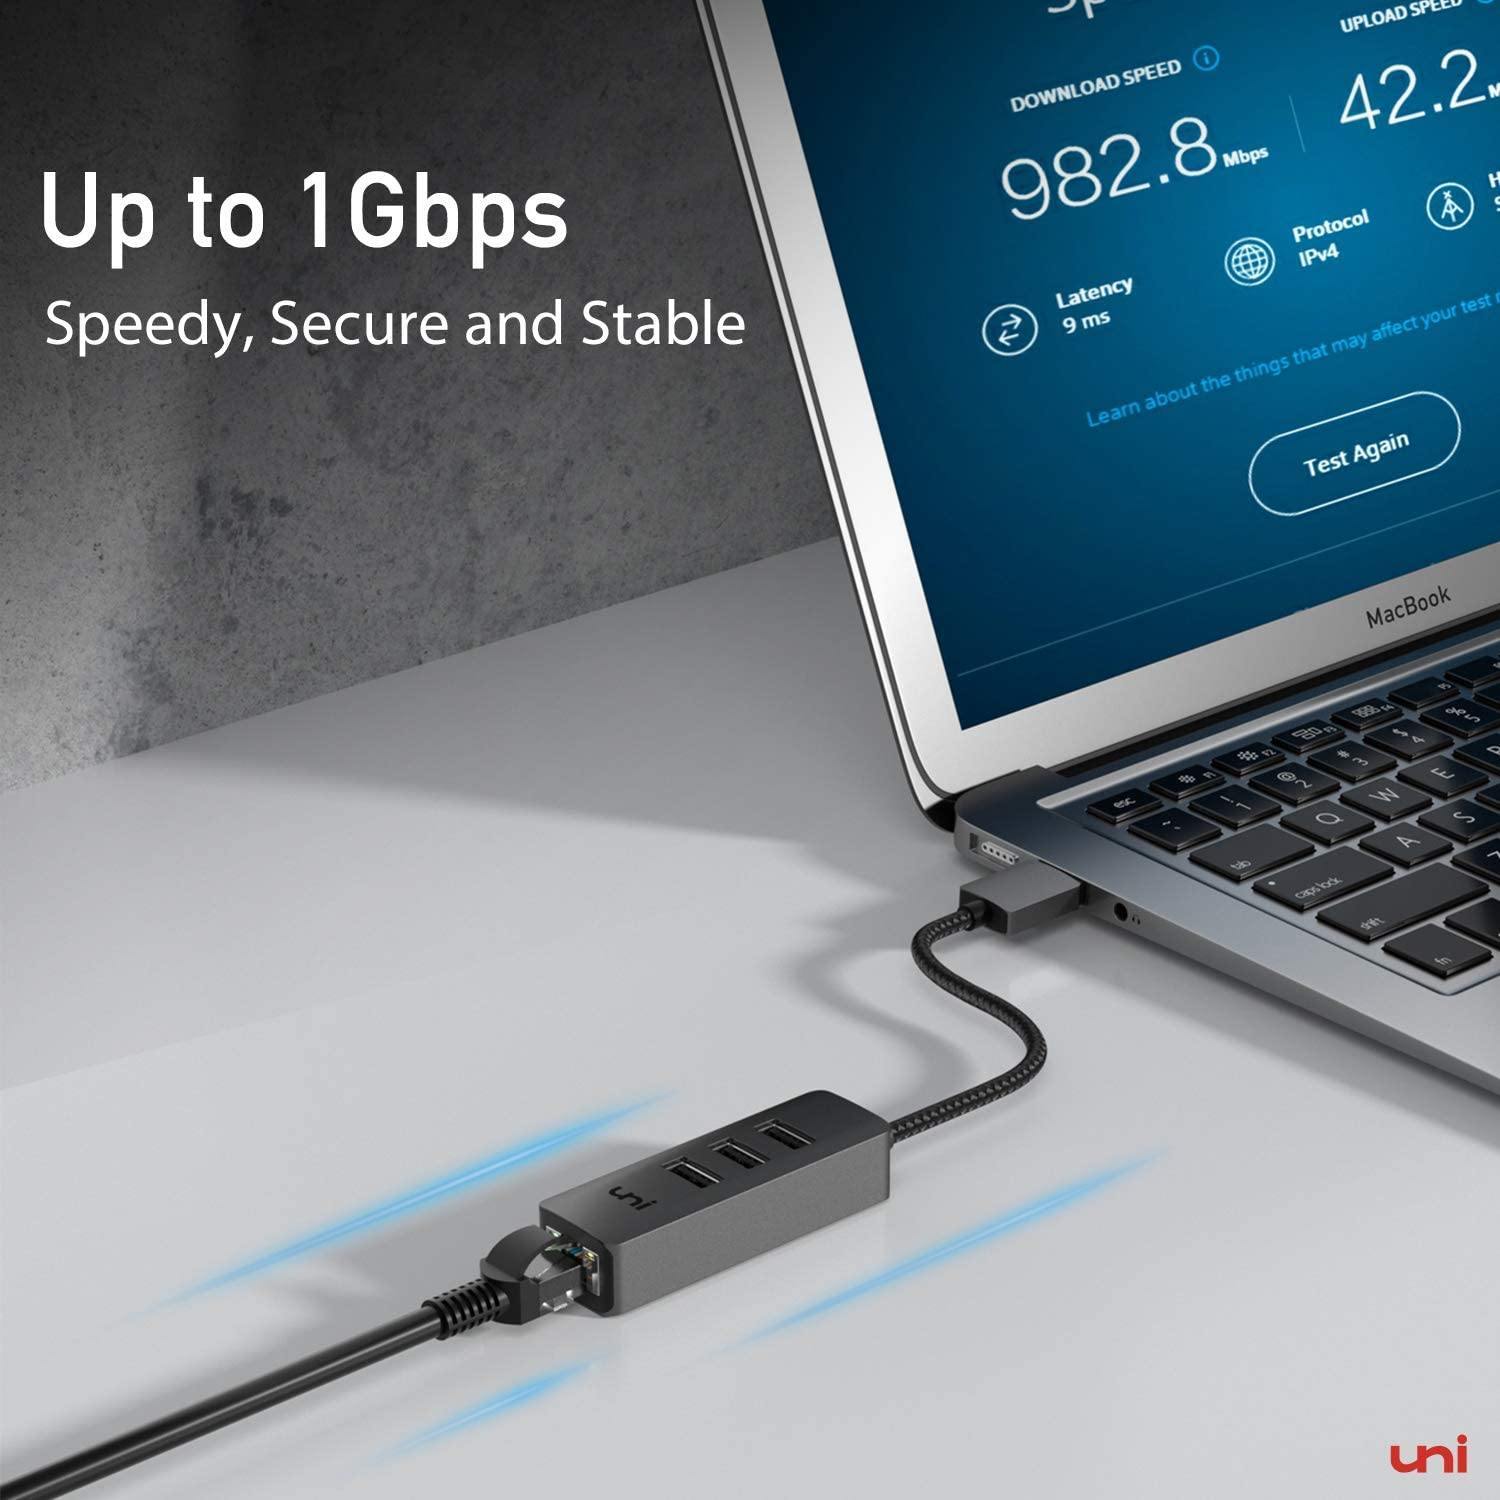 Ethernet Adapter up to 1Gbps speed | uni